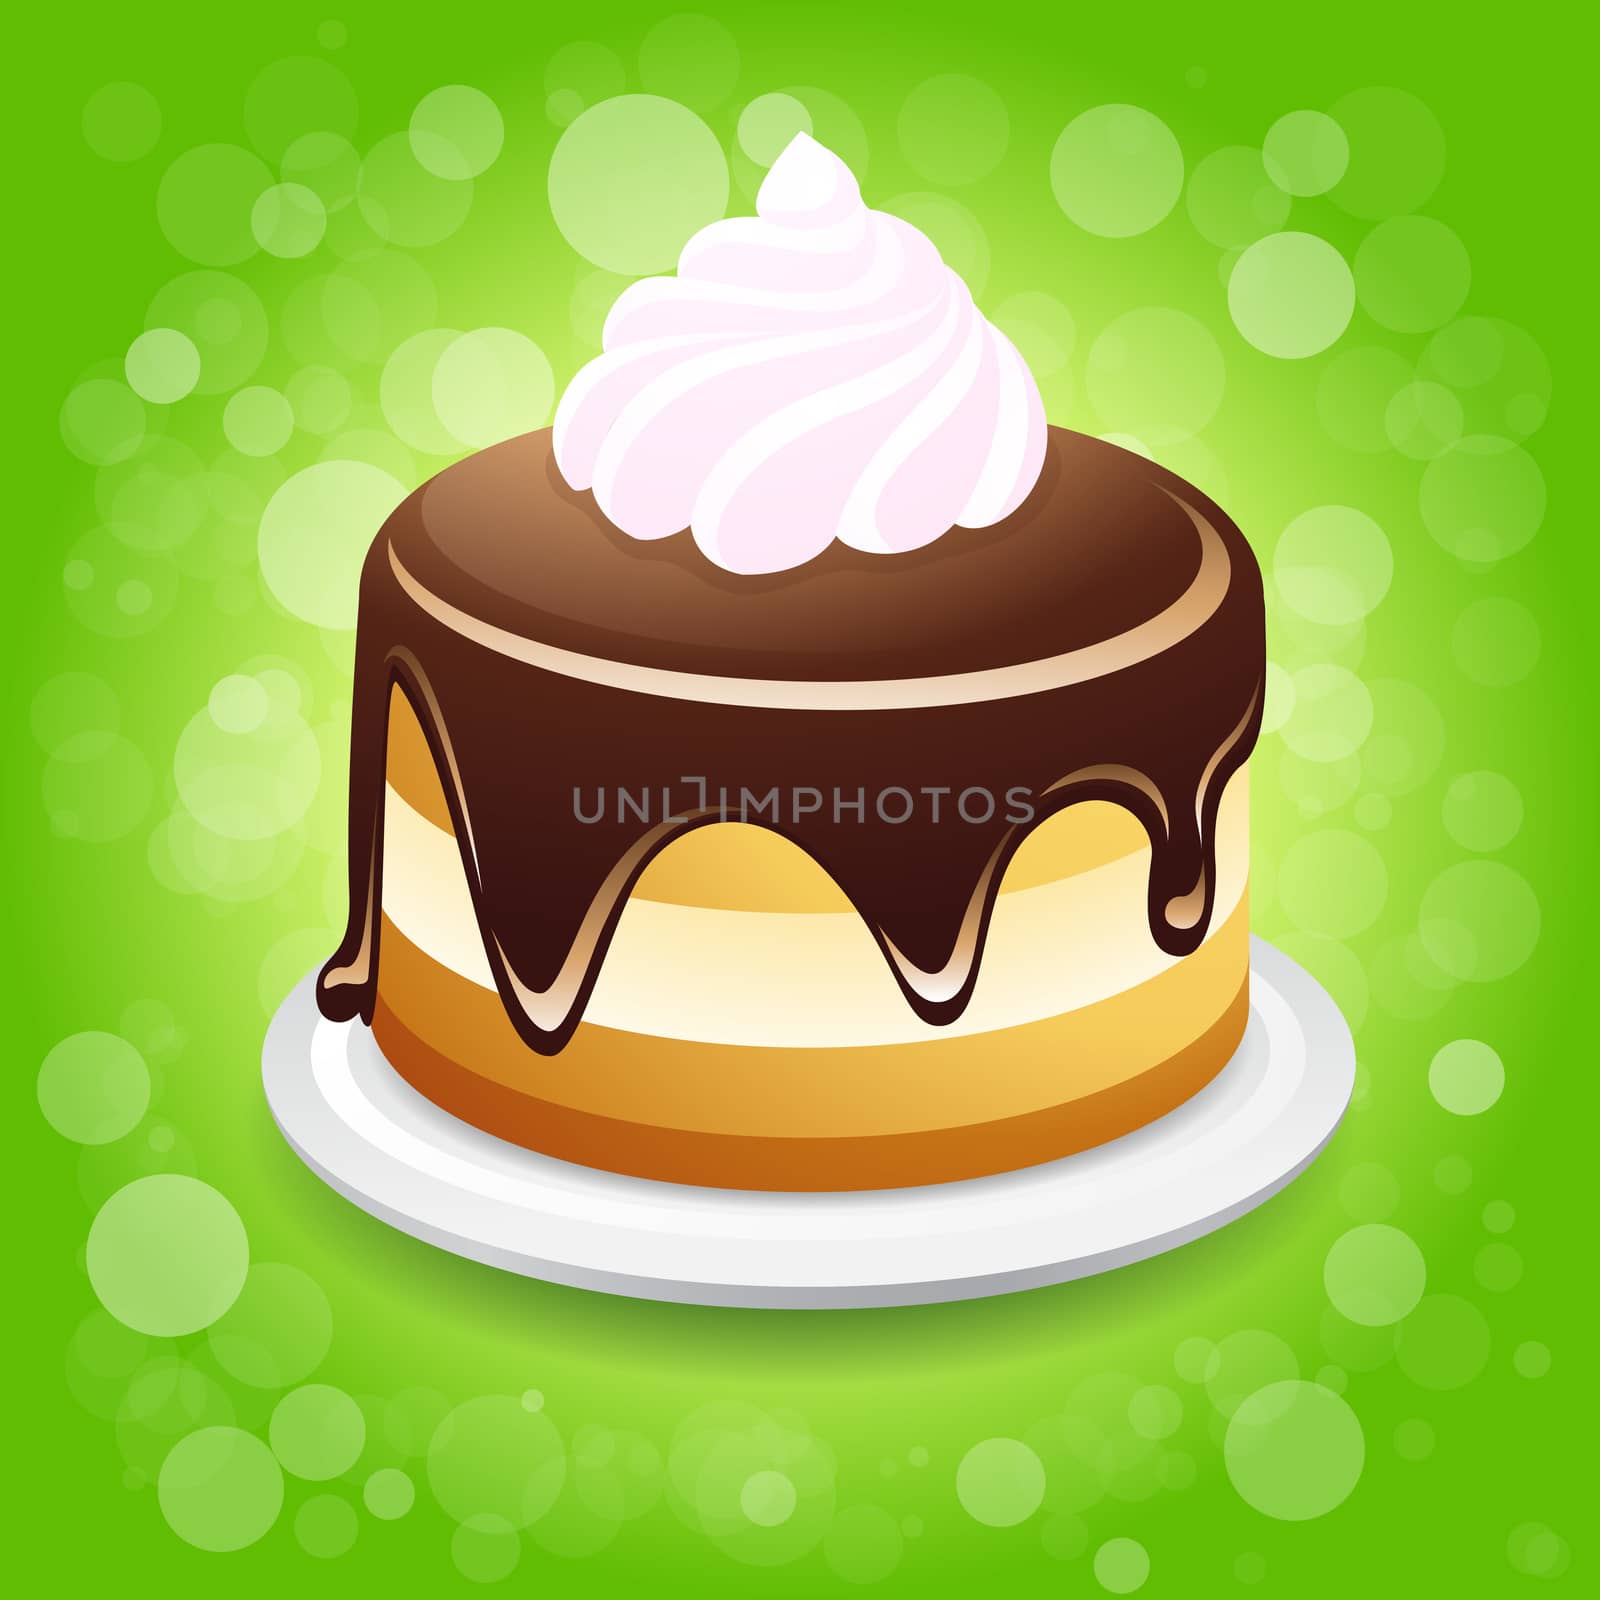 Yummy Cake on Green Background for Your Design